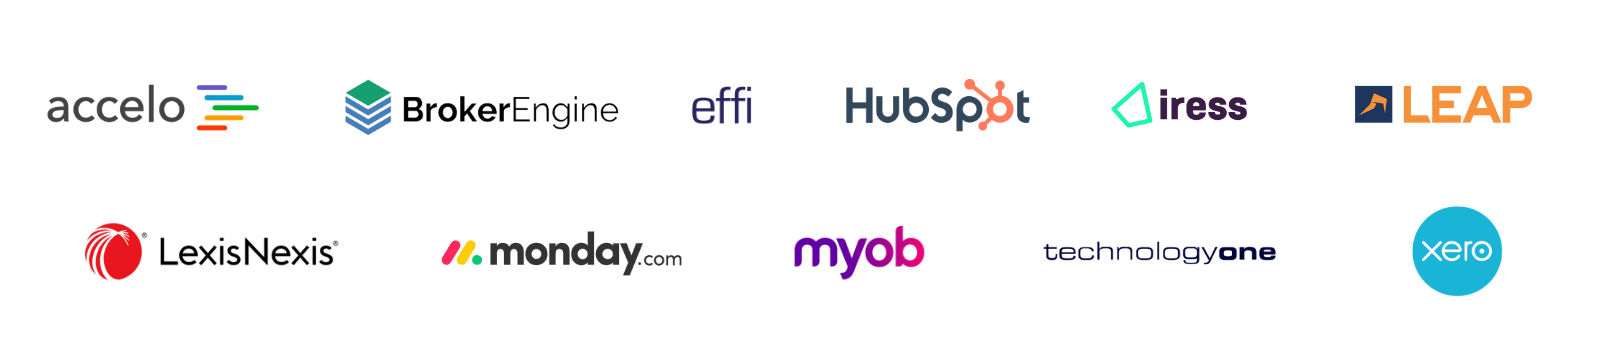 Our team can support your professional services business with expertise across many industry platforms - accelo, brokerengine, effi, hubspot, iress, leap, lexis nexis, monday.com, myob, technologyone, xero